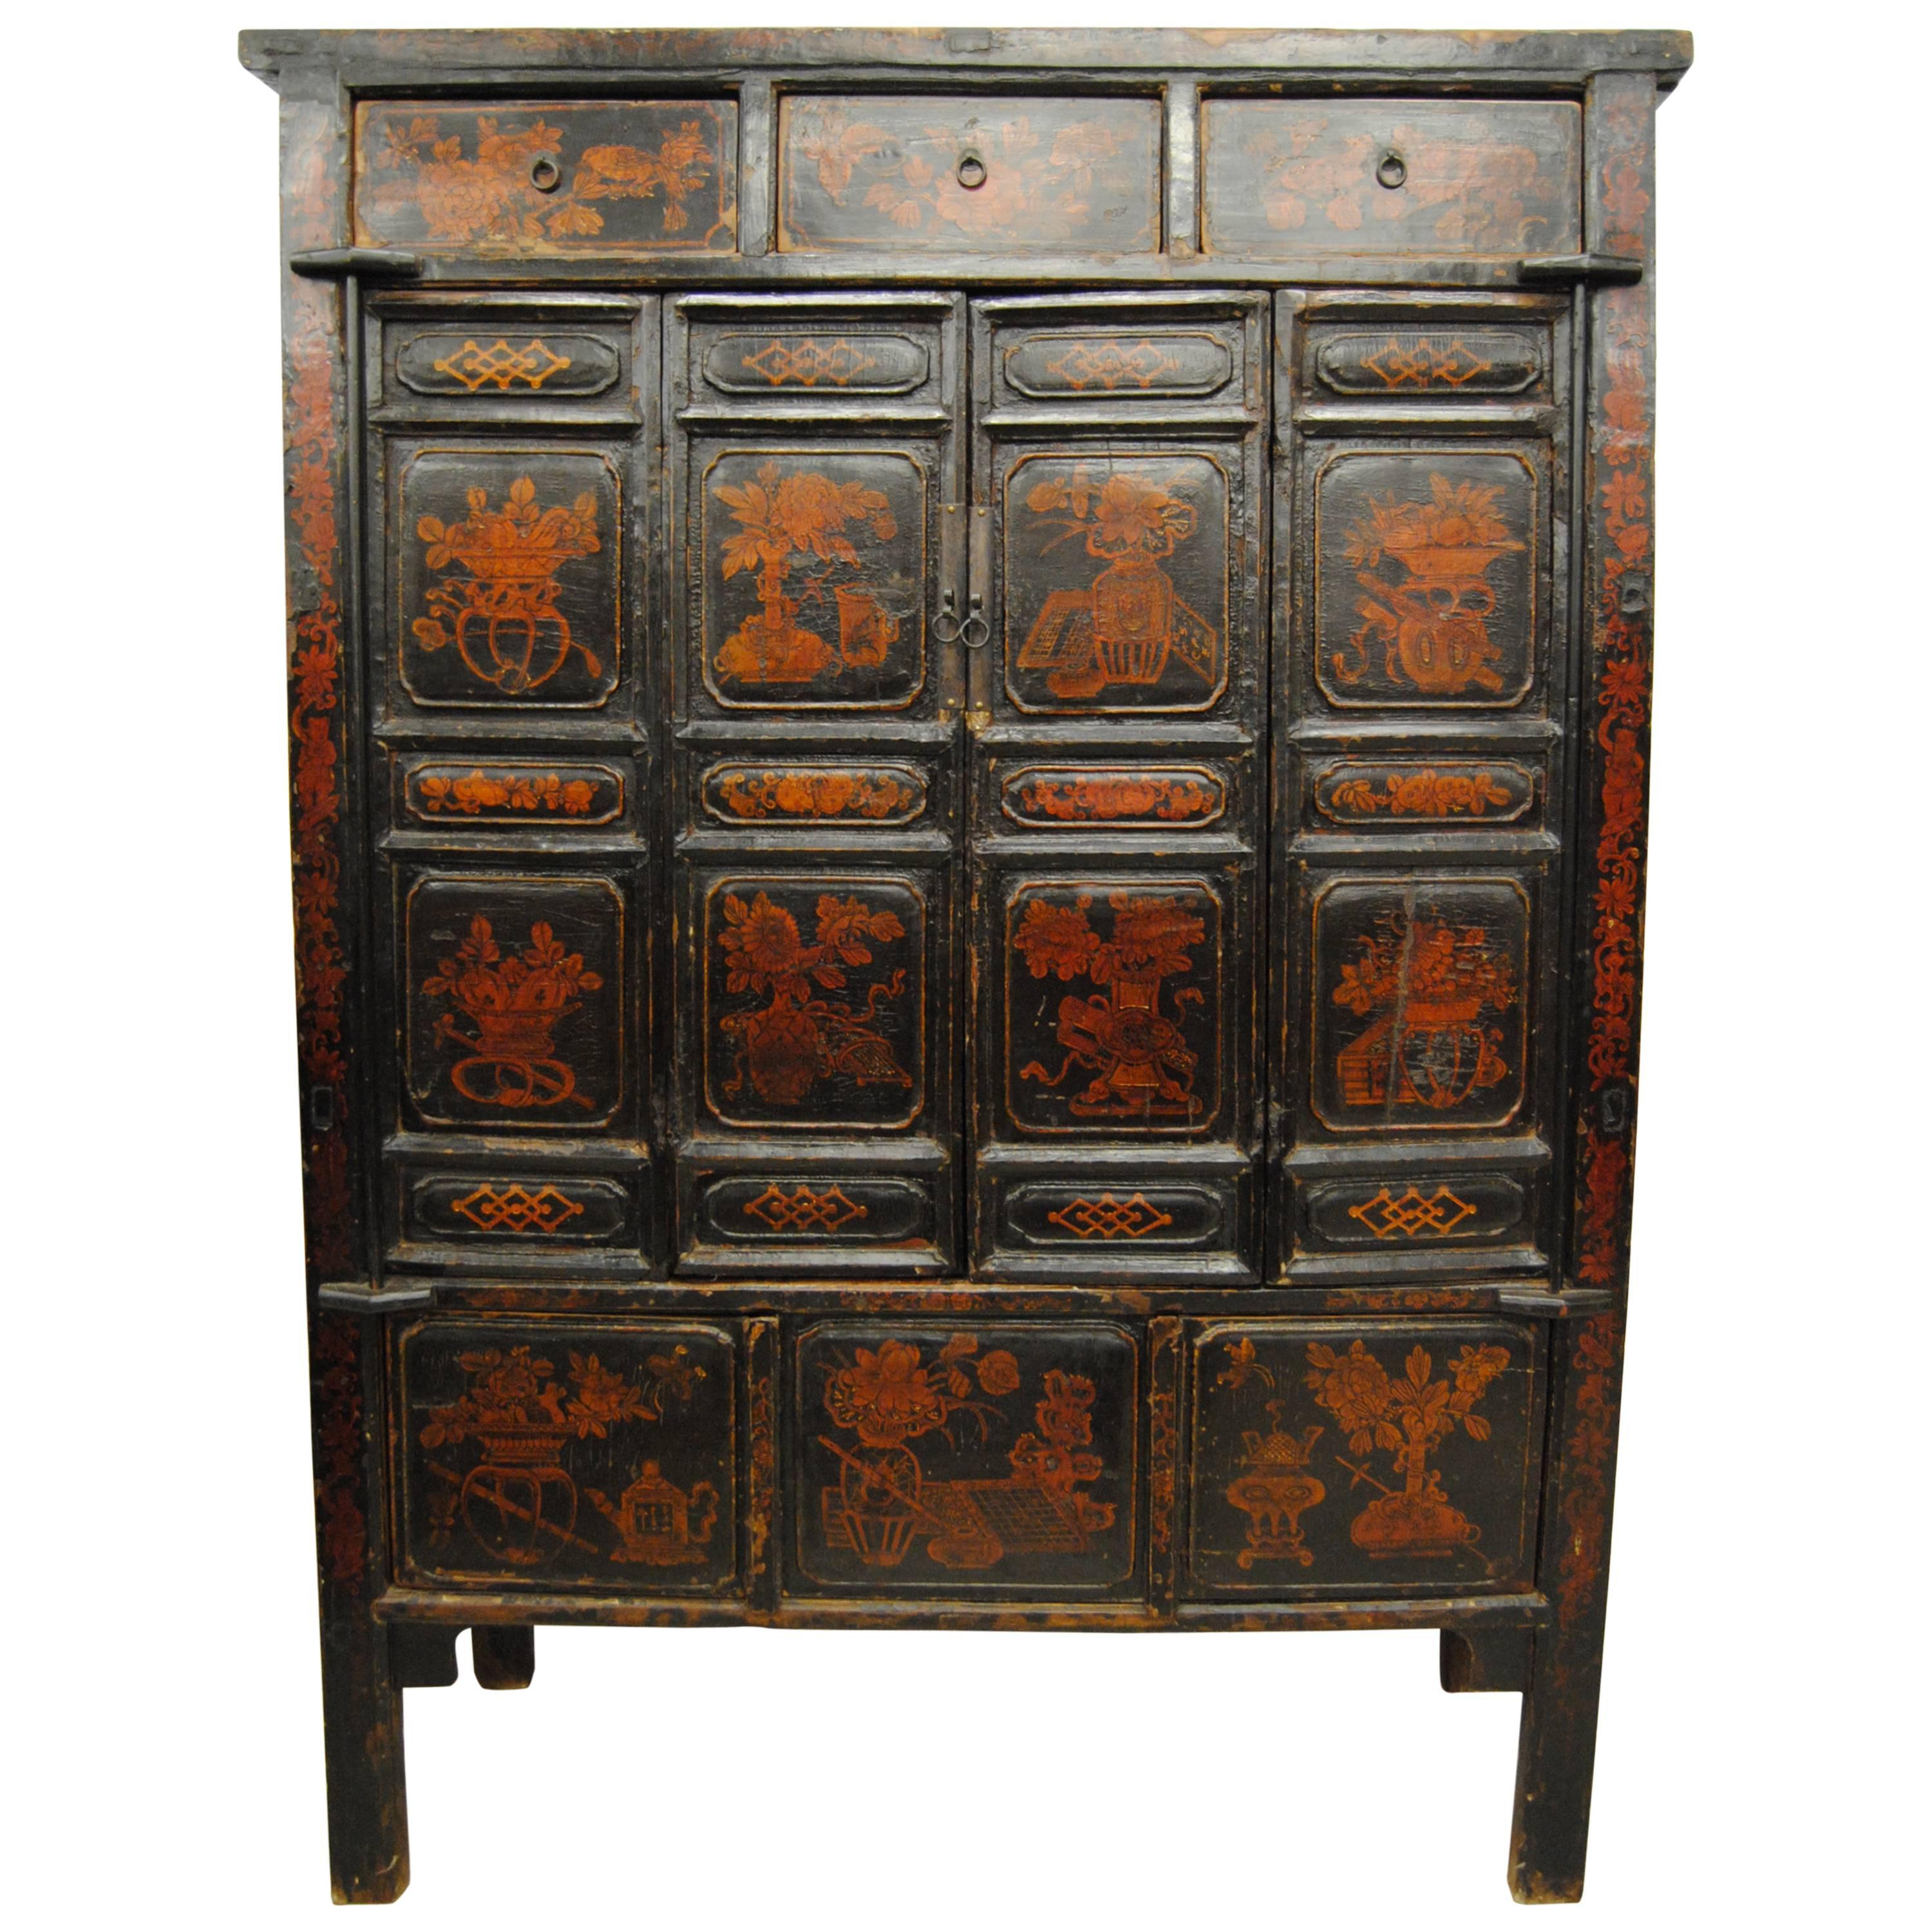 Antique Large Chinese Armoire with Original Lacquer, Shanxi Province, Early 1800